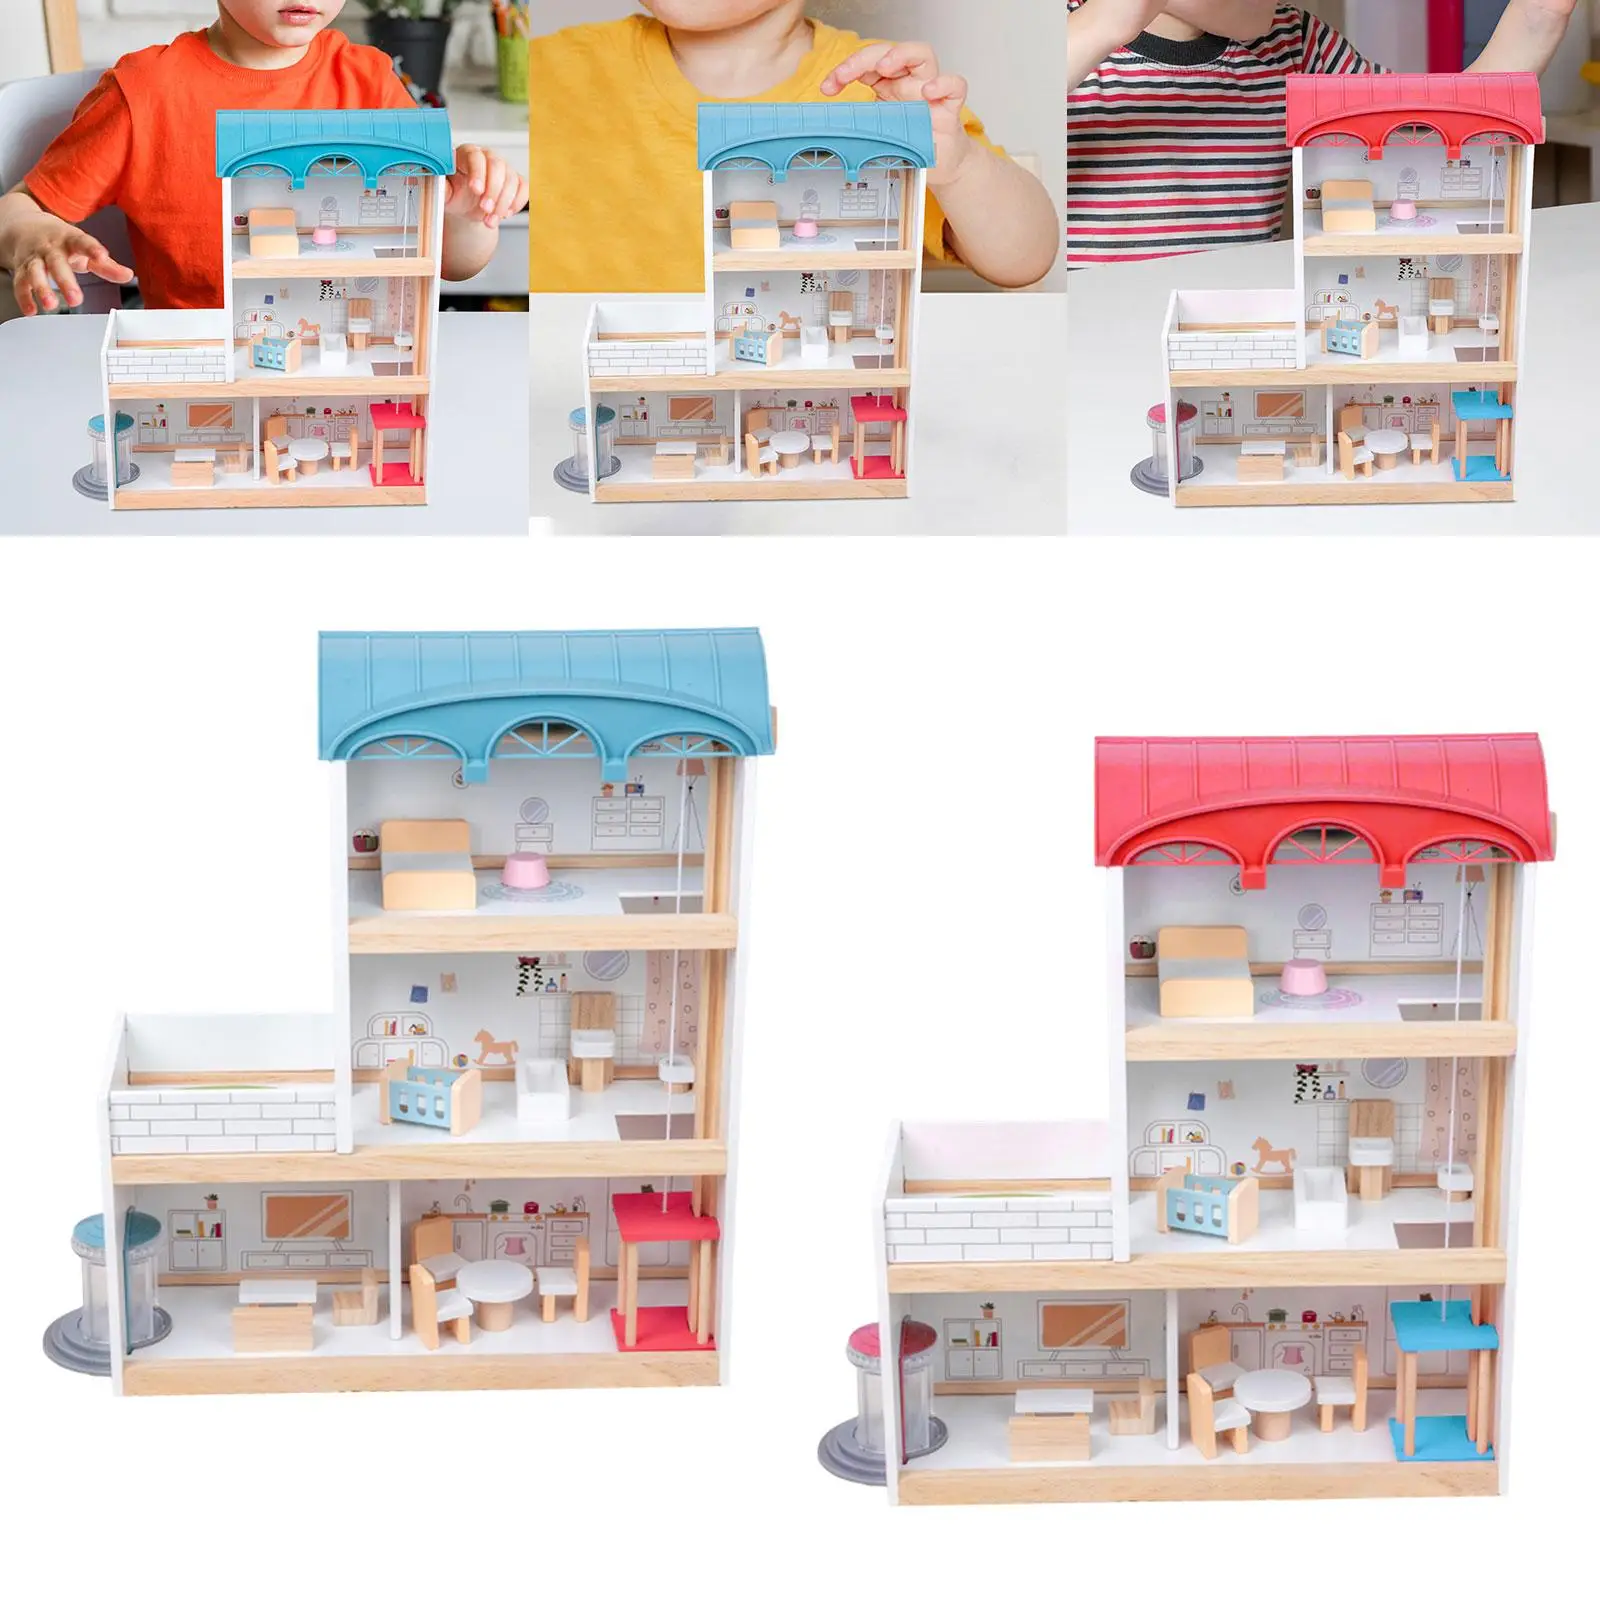 Wooden Dollhouse Mini Furniture Toy for Kids Gift Toy Garden Indoor Outdoor 3 Years and up Easy to Assemble European Style House